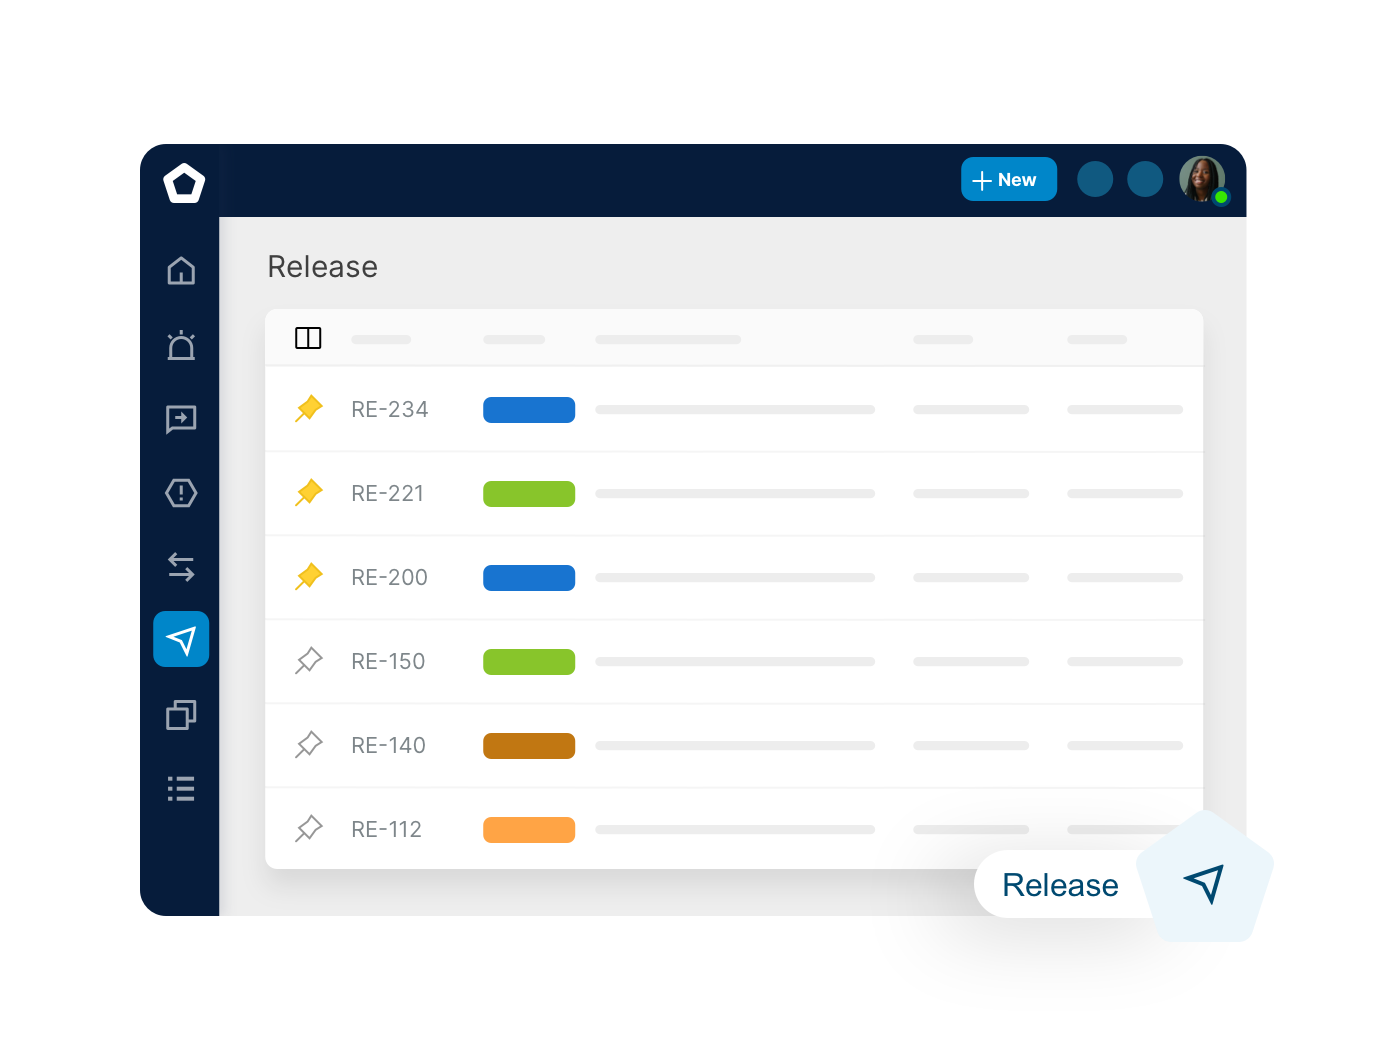 Simplify Service Requests and Empower Your Team with Efficient Service Request Management